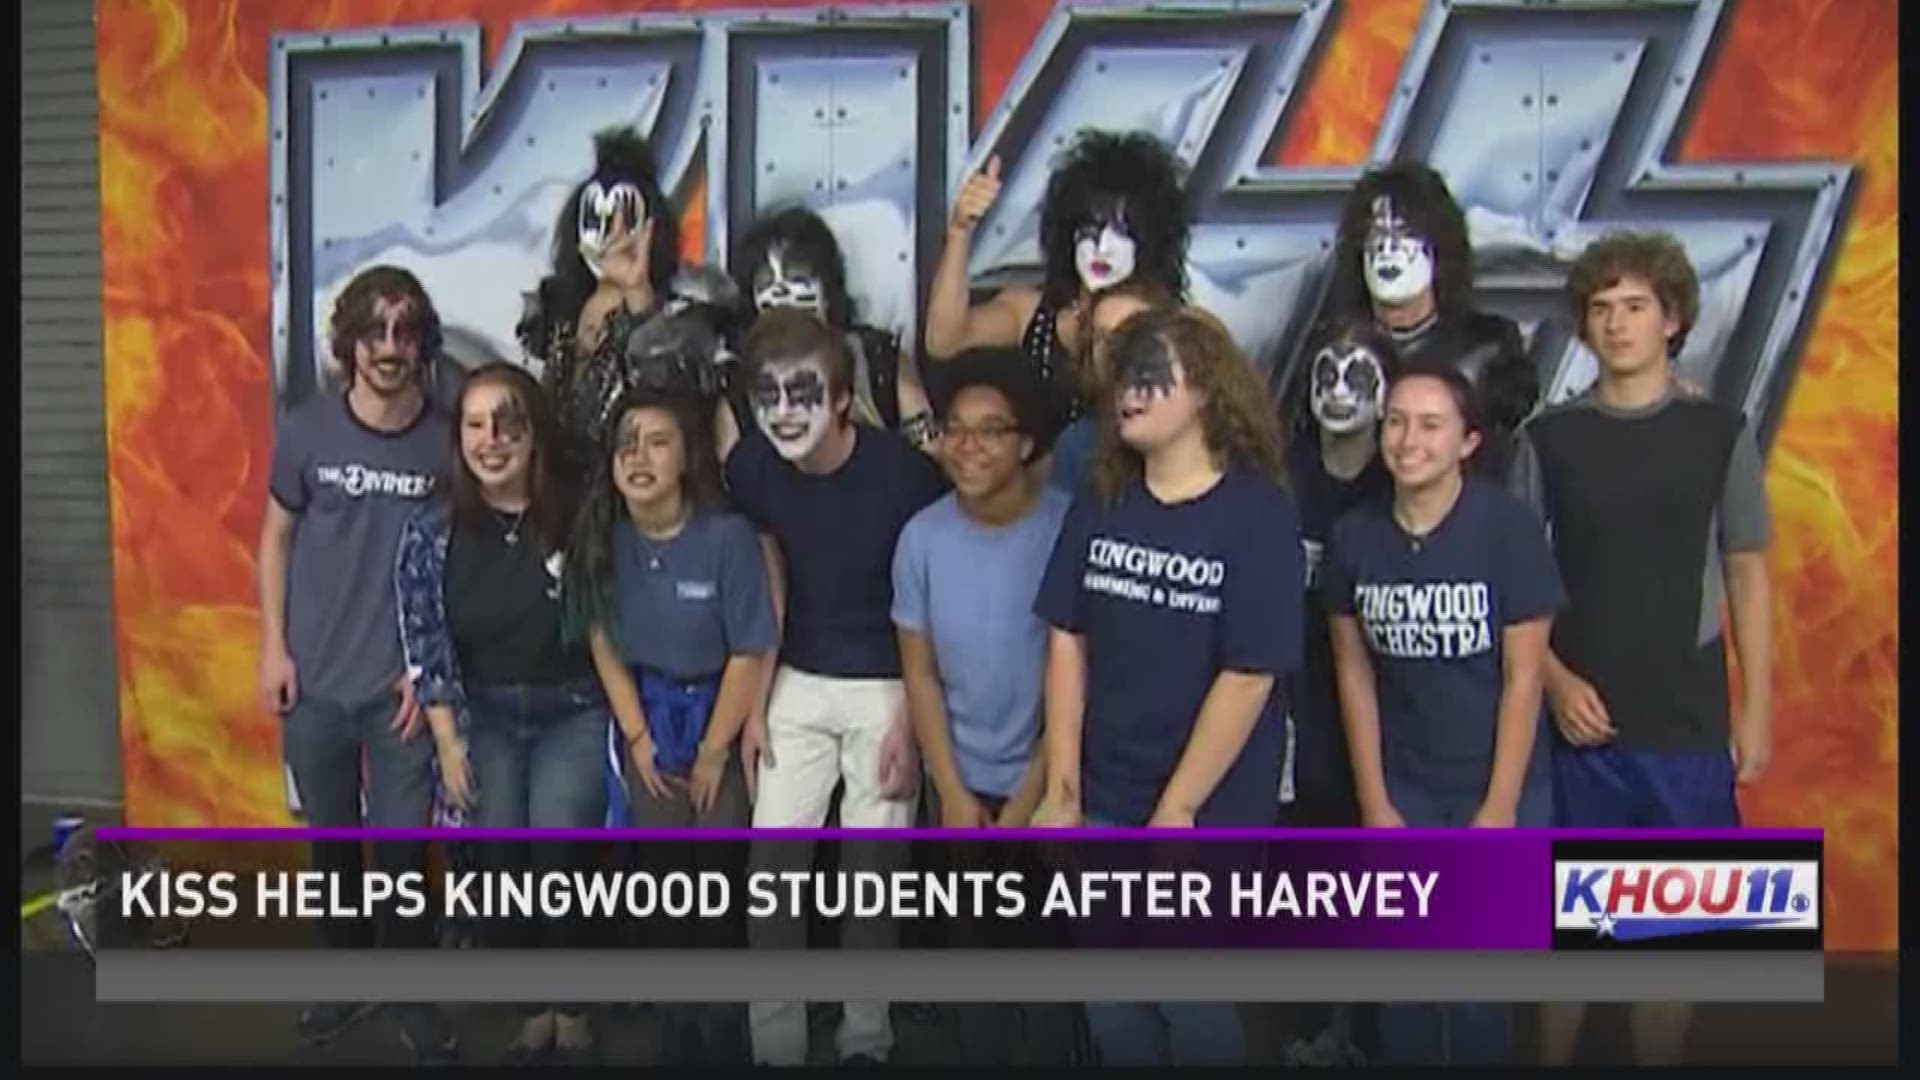 KISS helped raise awareness of a fundraiser for Kingwood High School students who lost so much during Harvey.